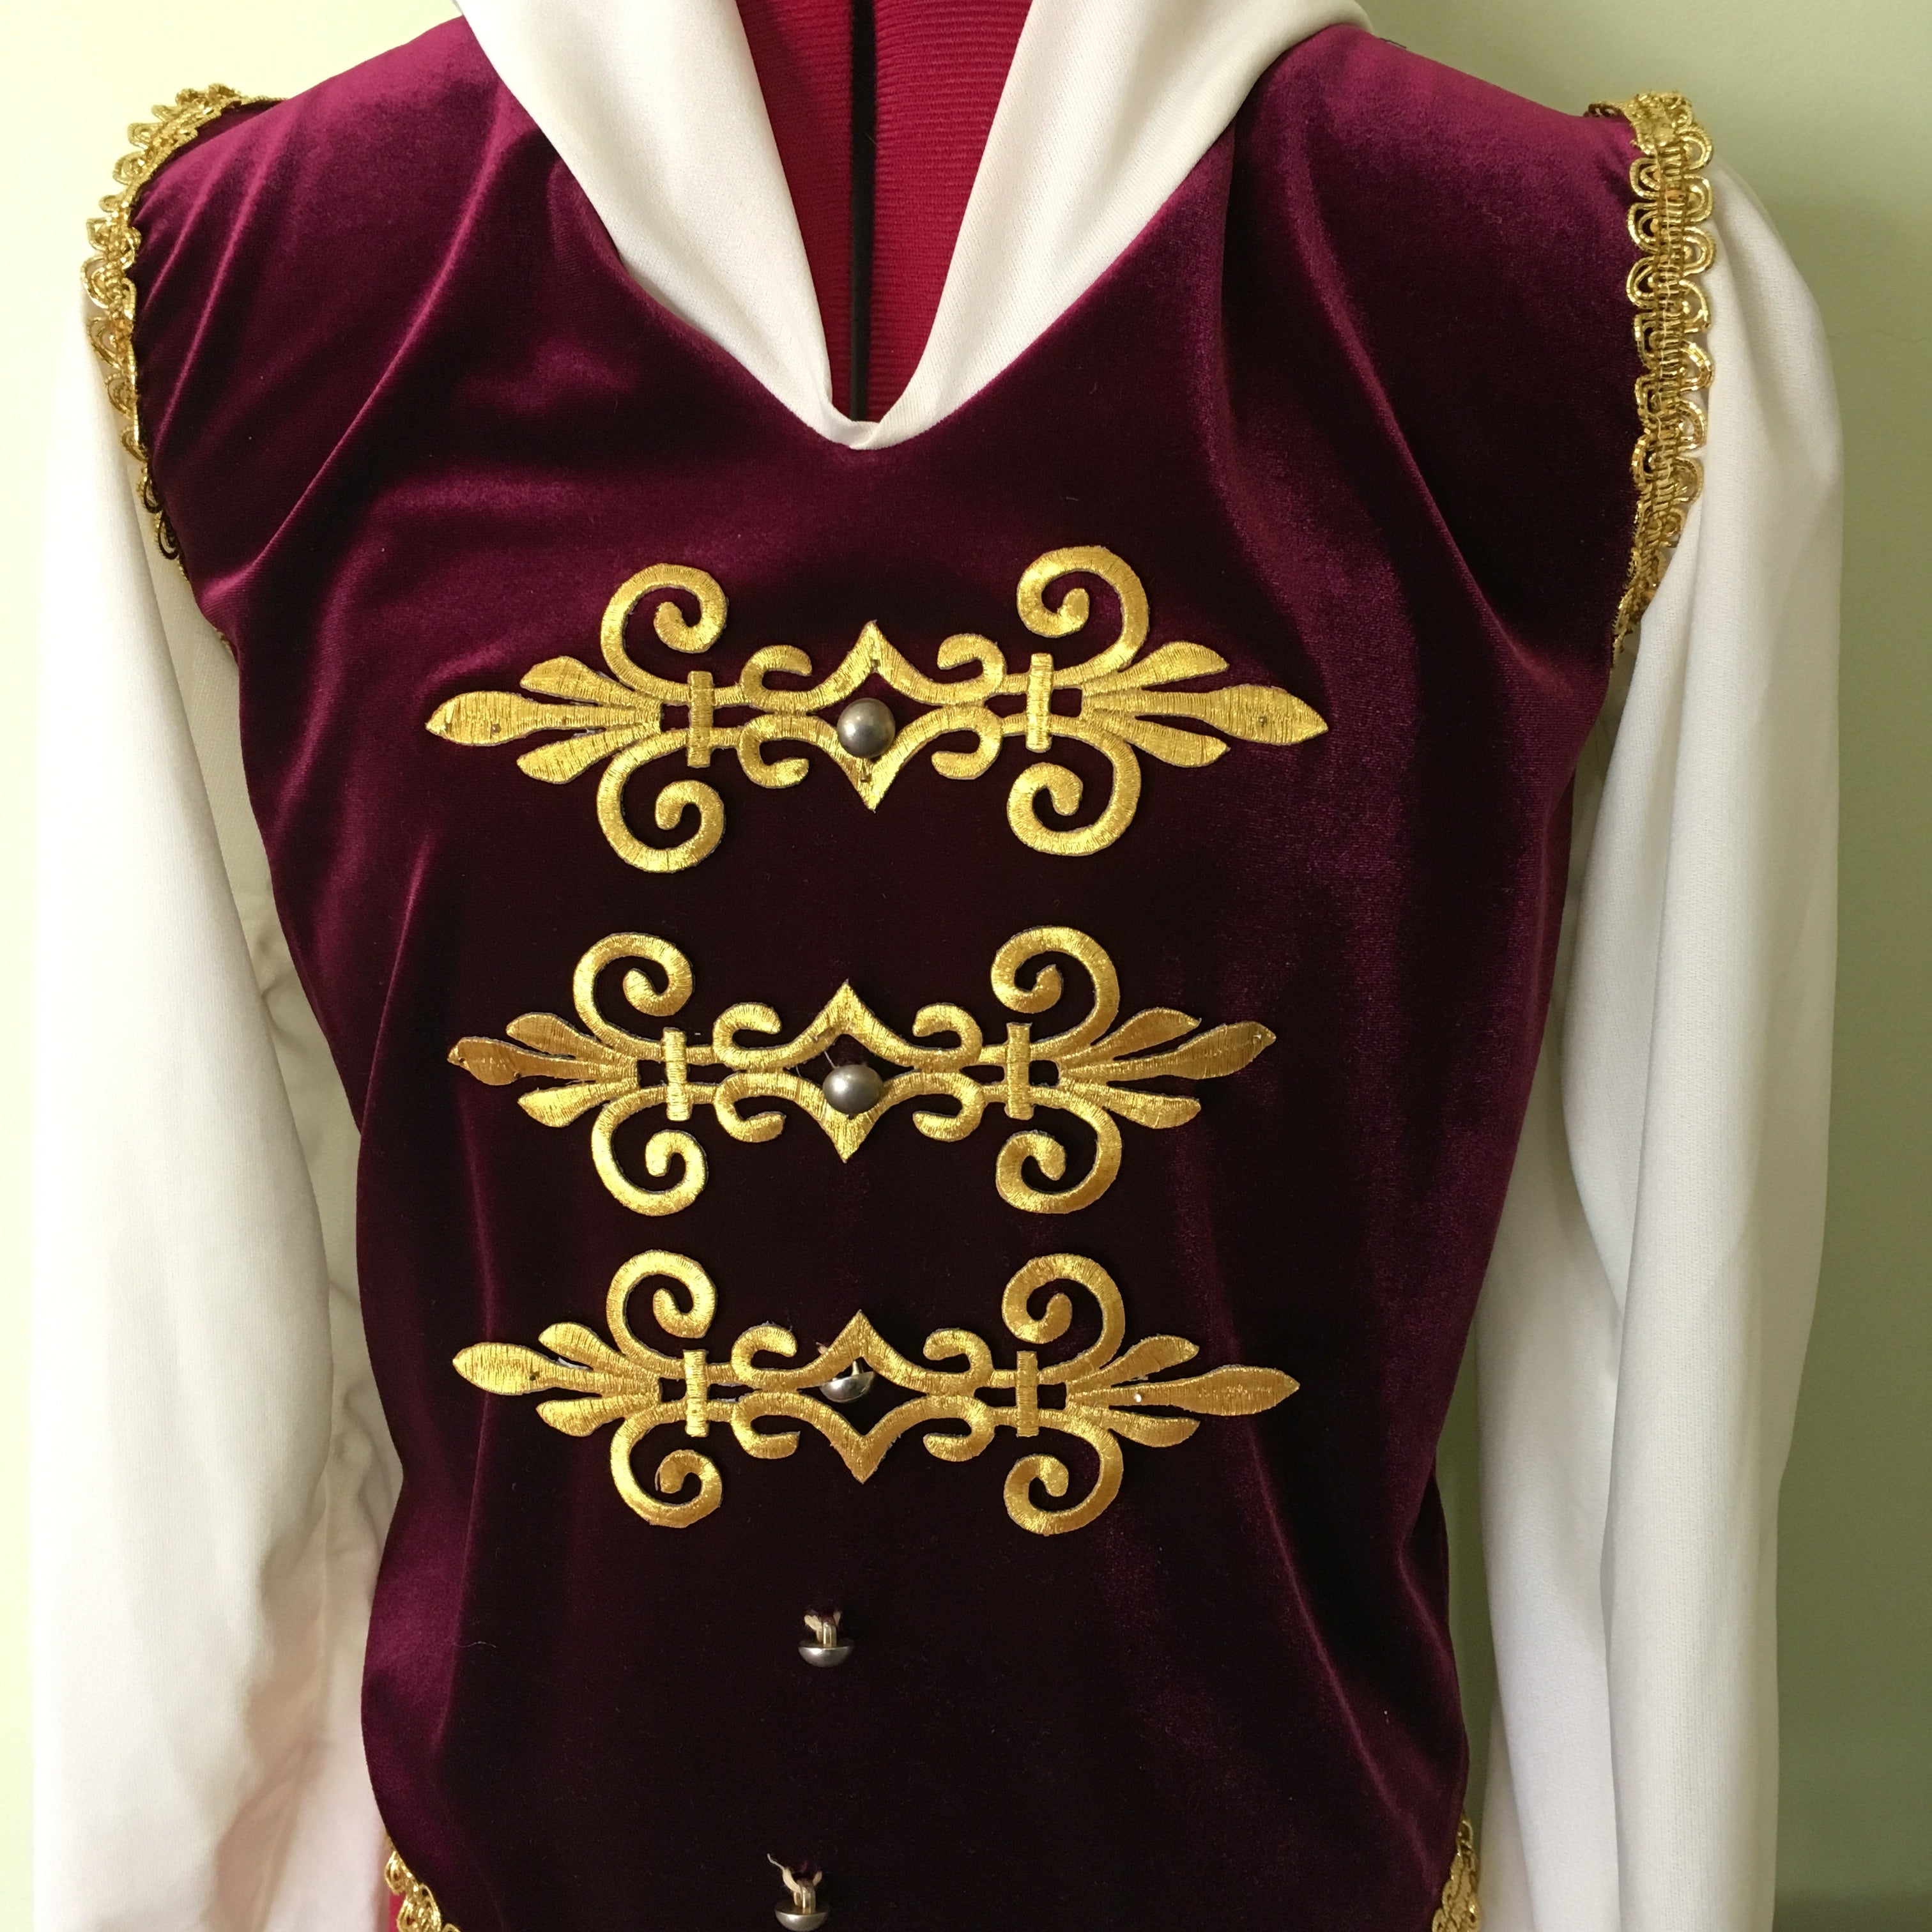 The gold military style applique is a versatile decoration for boys or male ballet costume . In this photo the appliques are placed horizontally down the front to embellish the buttons.